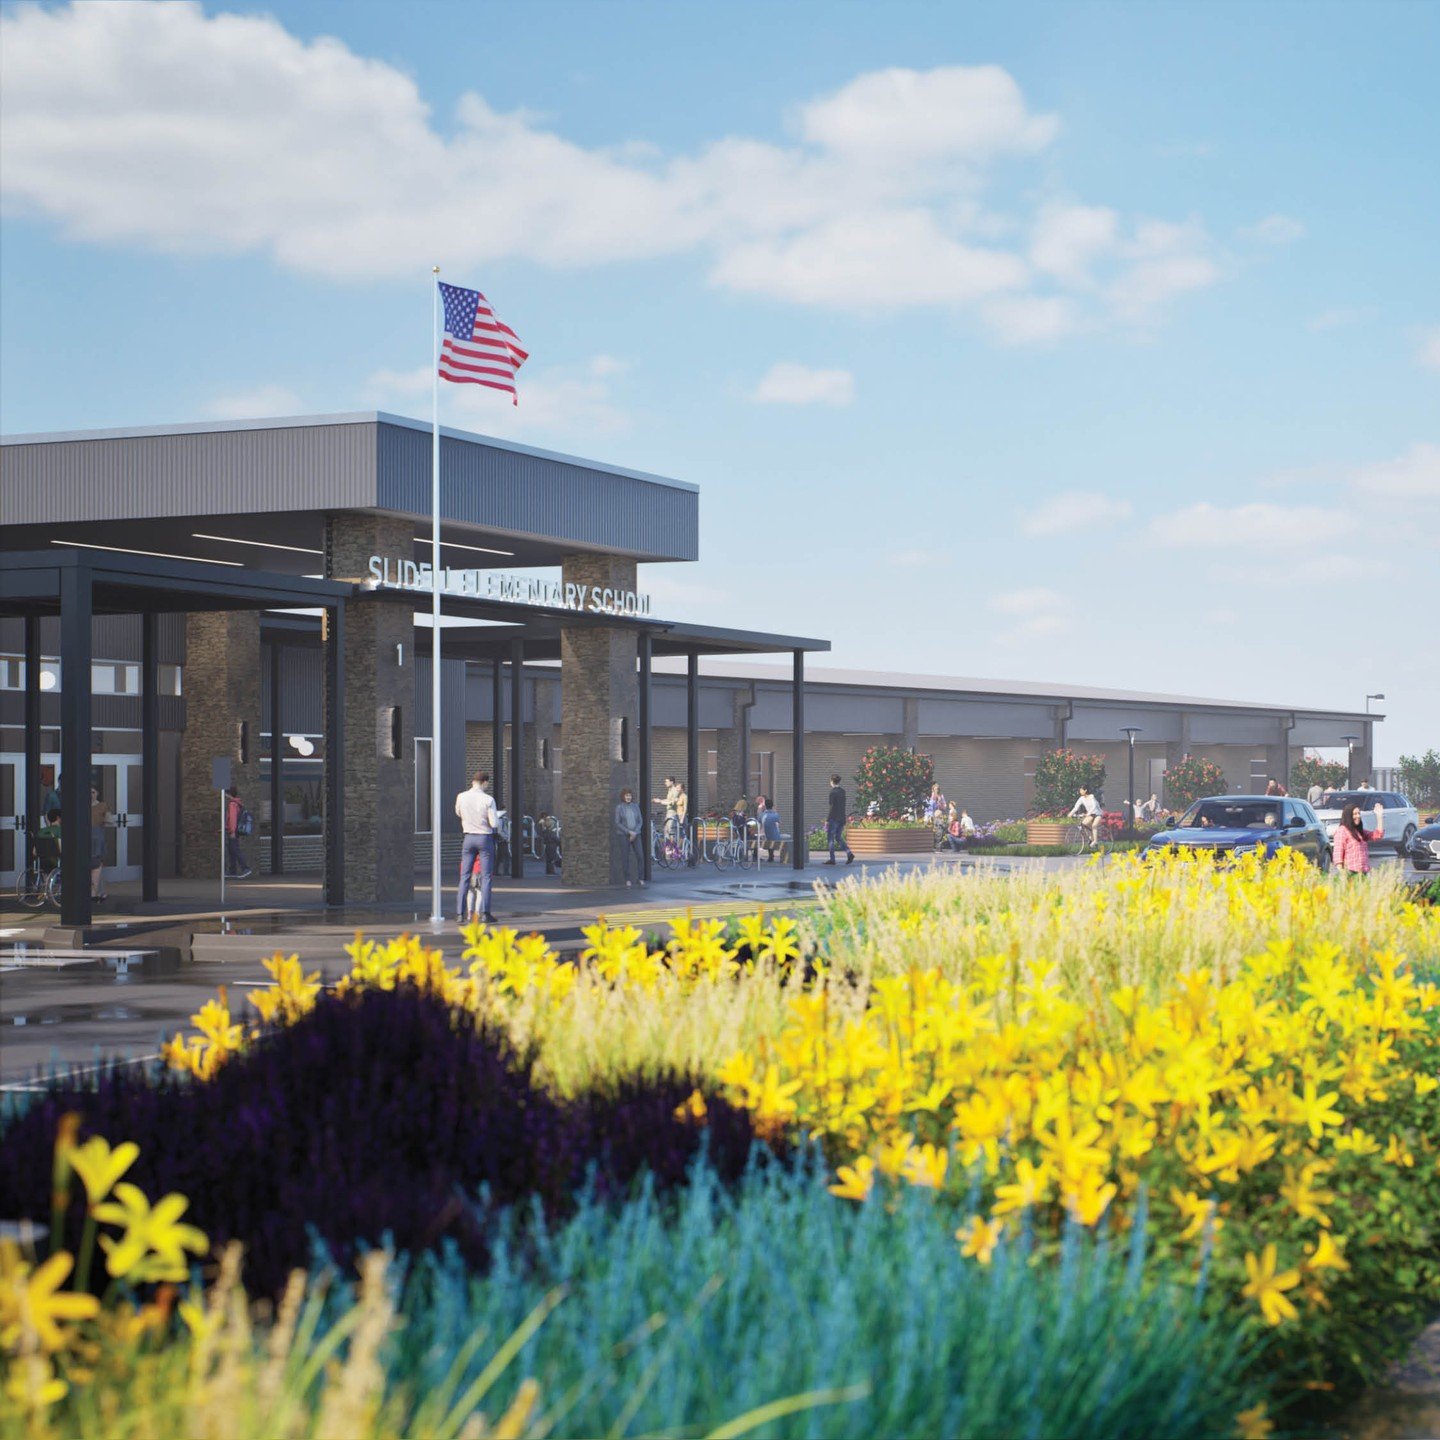 Check out our new animation video for Slidell ISD, showcasing the $27.7M elementary school project set for completion in August 2025, featuring larger classrooms, a state-of-the-art library, safety upgrades, and a connection to nature with garden bed